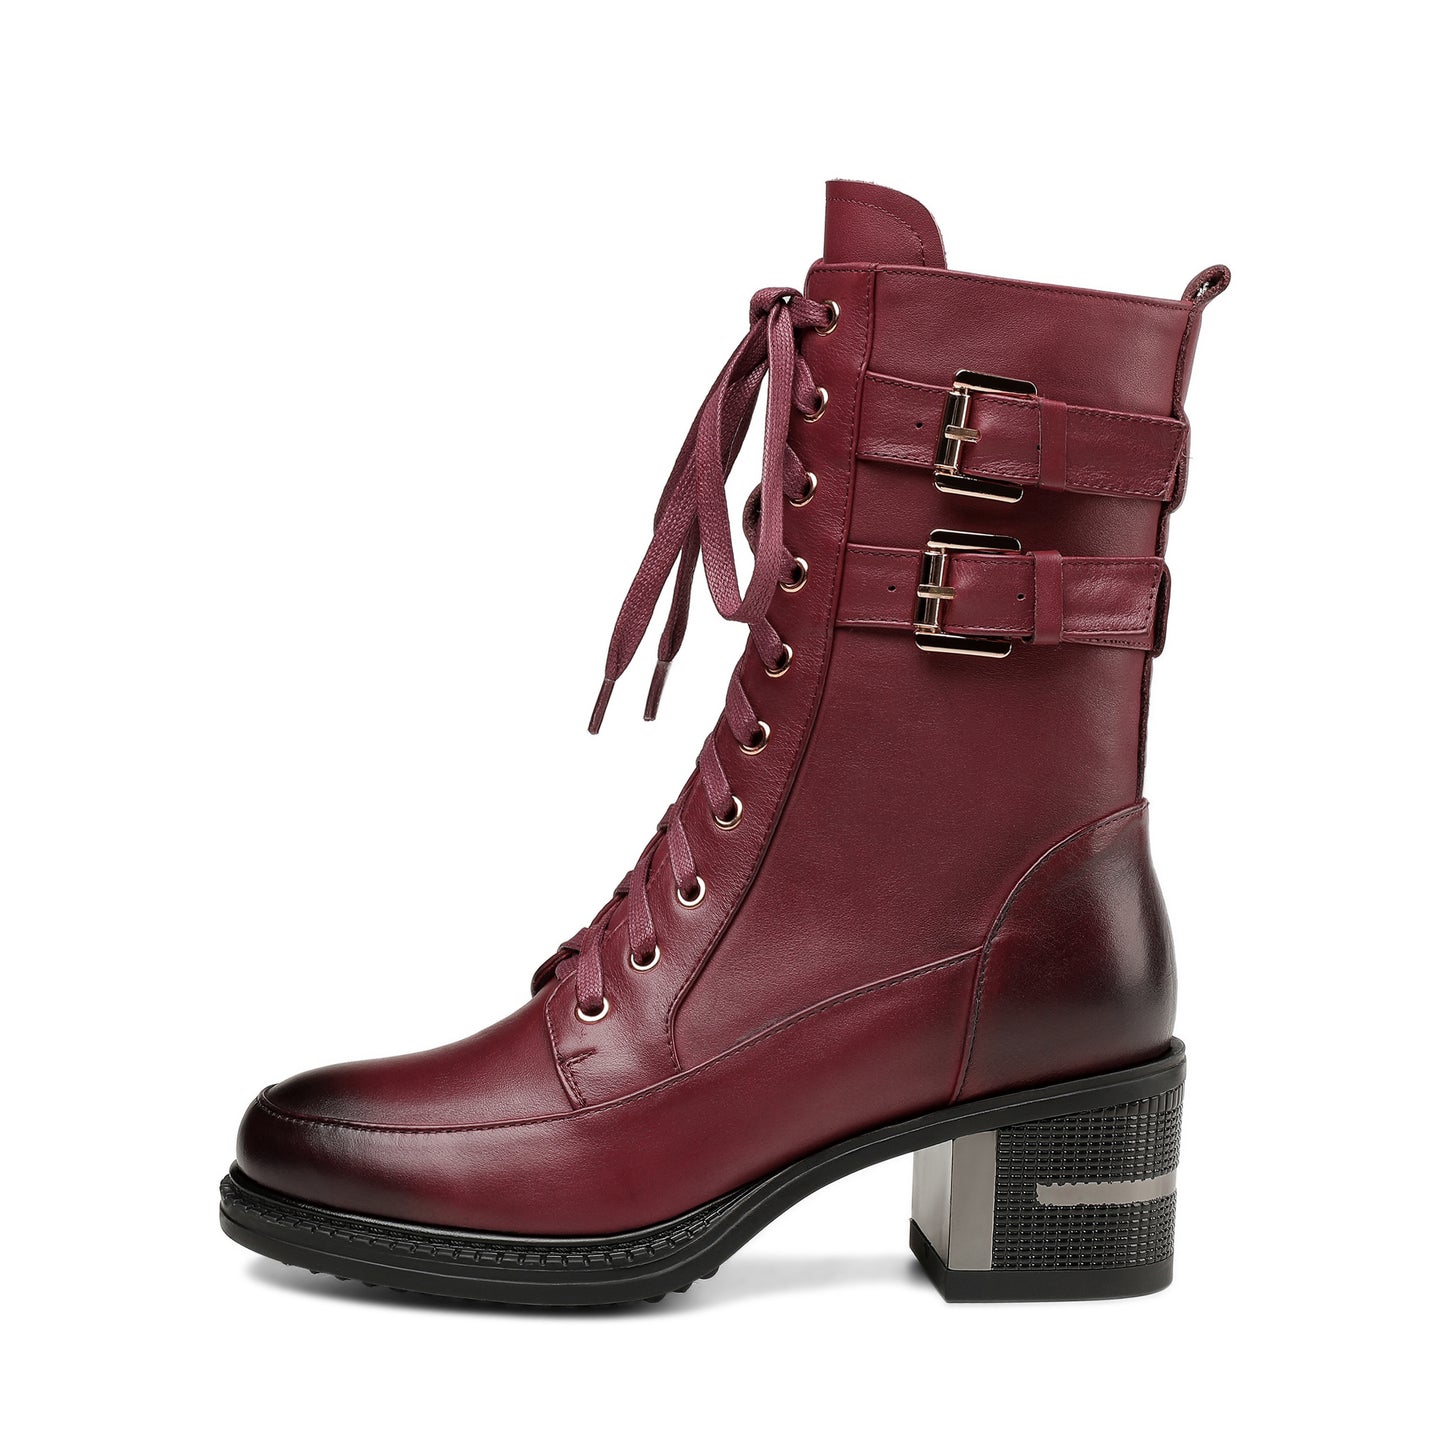 TinaCus Genuine Leather Round Toe Lace Up Side Zipper Handmade Buckles Mid Chunky Heels Stylish Women's Mid-Calf Boots